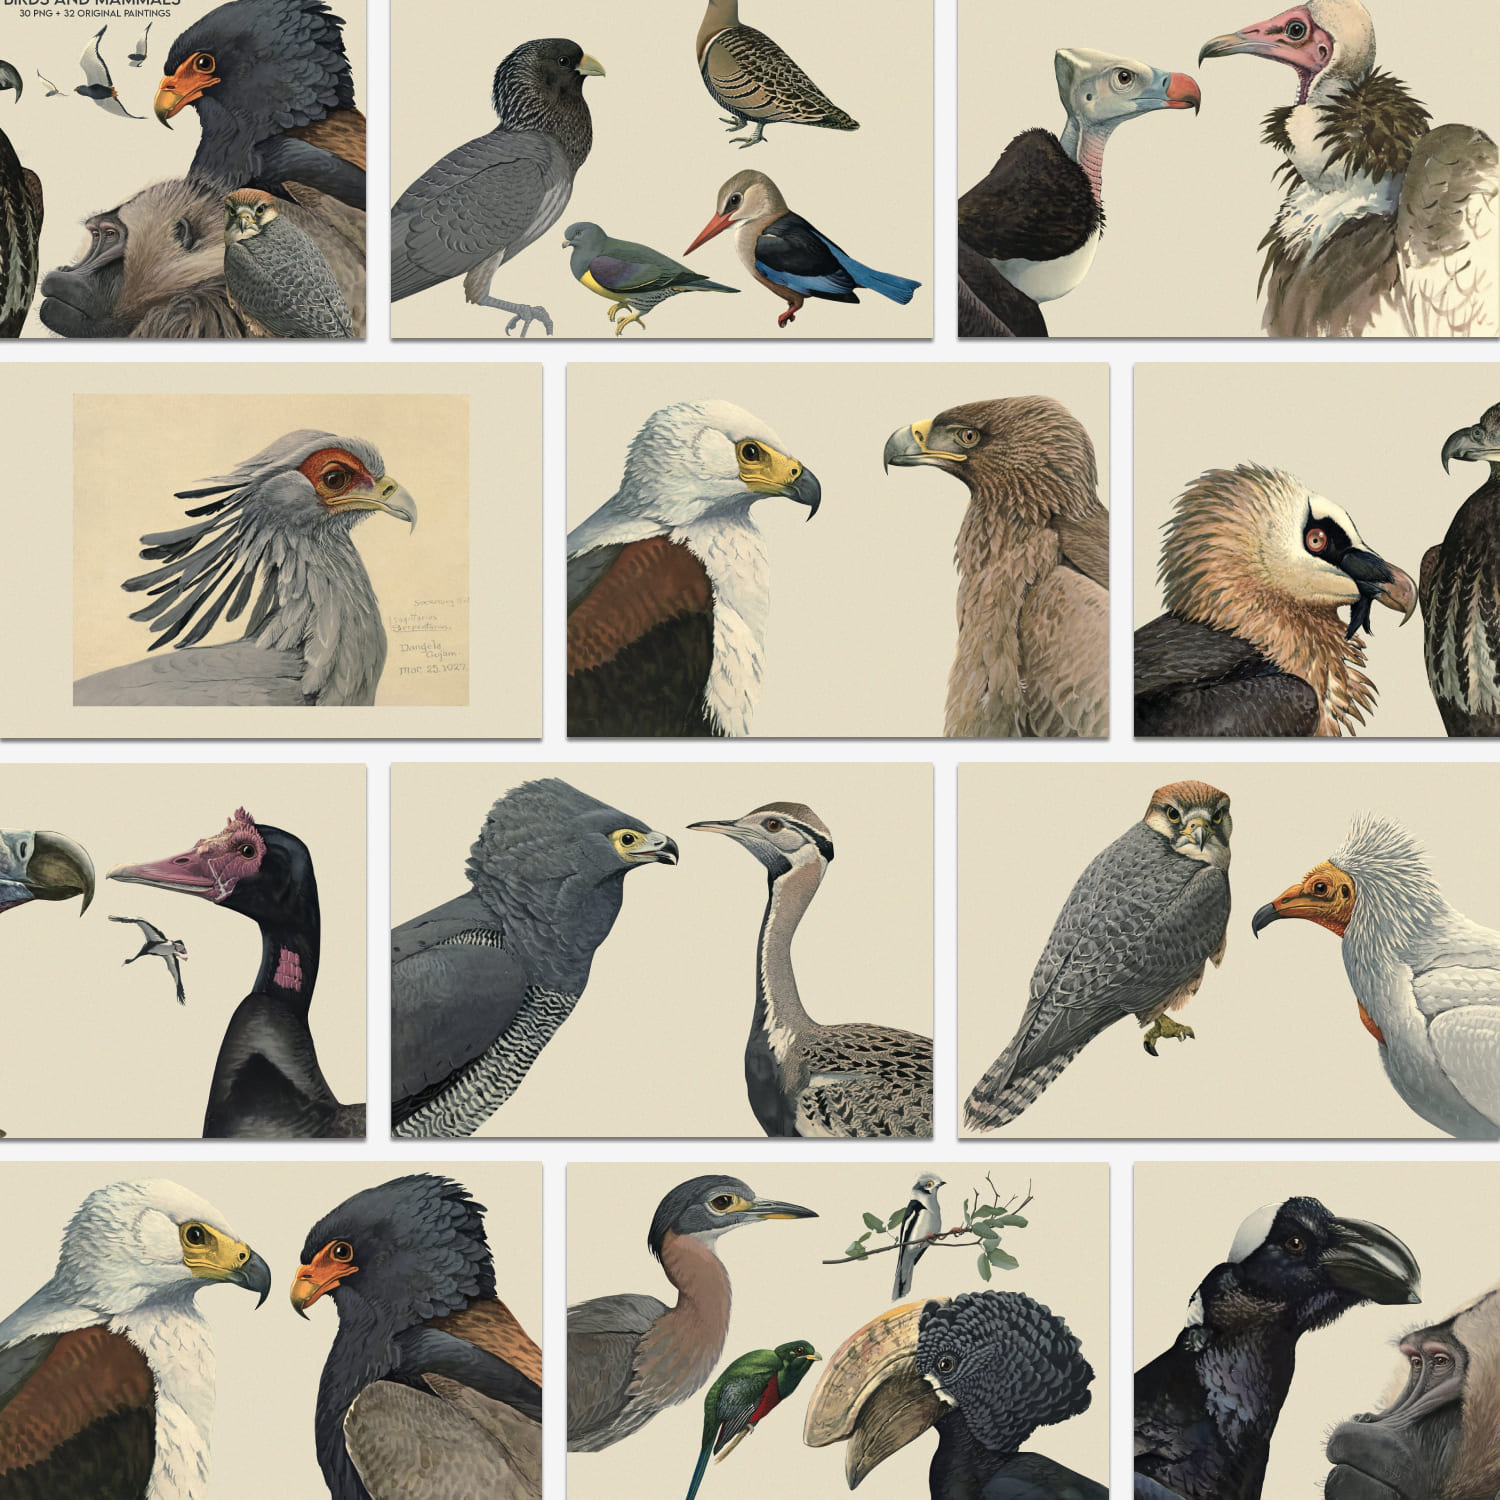 Album of Abyssinian Birds & Mammals created by Lilithcollageart.